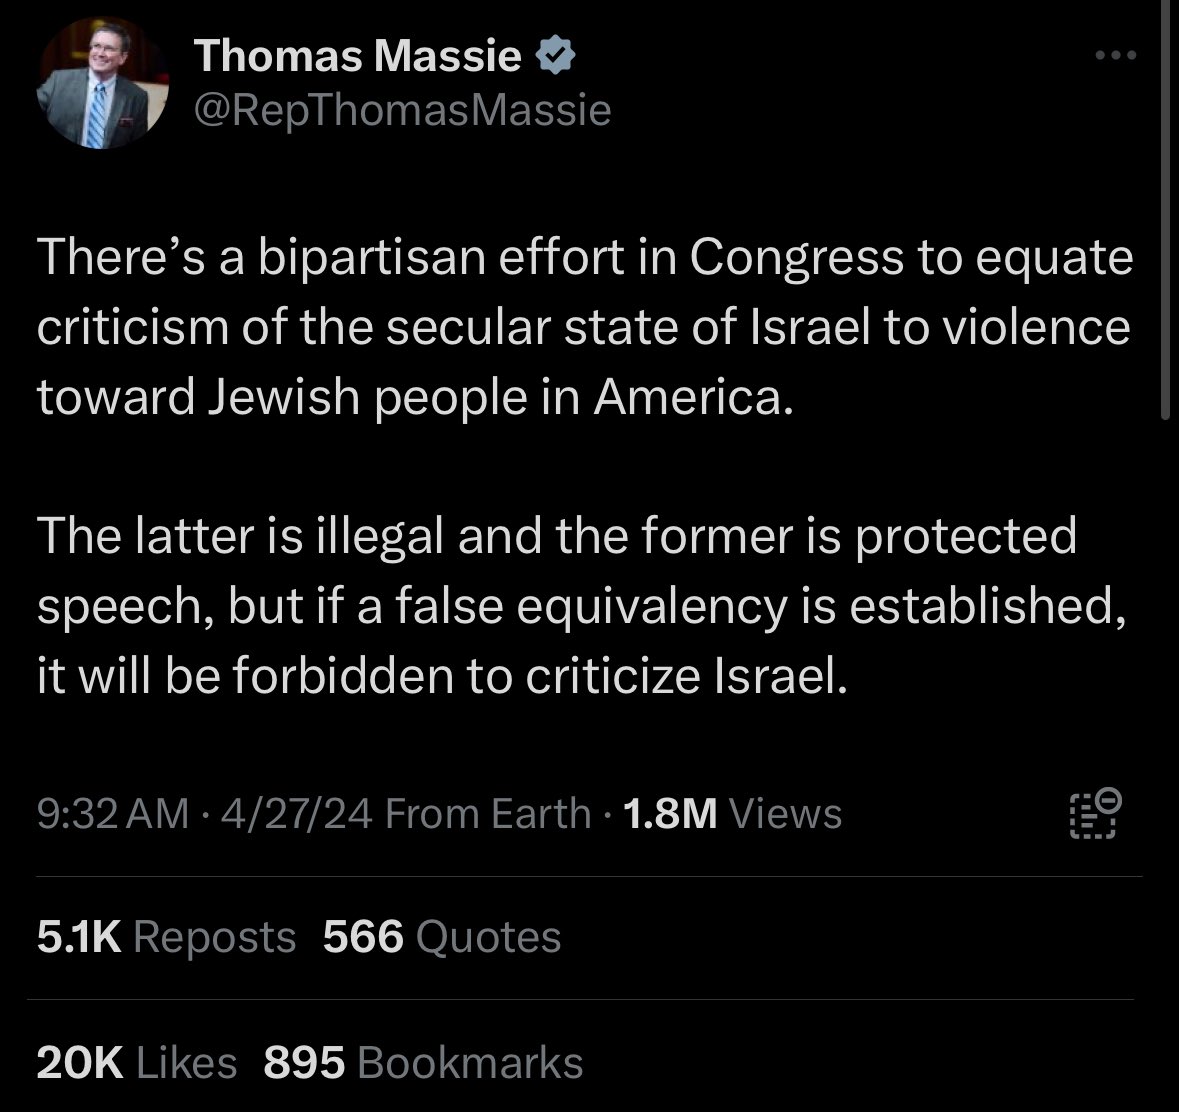 @SpeakerJohnson Mr speaker stop putting other countries before America. Thomas Massie has been forthright in his commentary on the ongoing protests, demonstrating a rare willingness among government officials to openly criticize Israel. It's important to have representatives who are unafraid to…